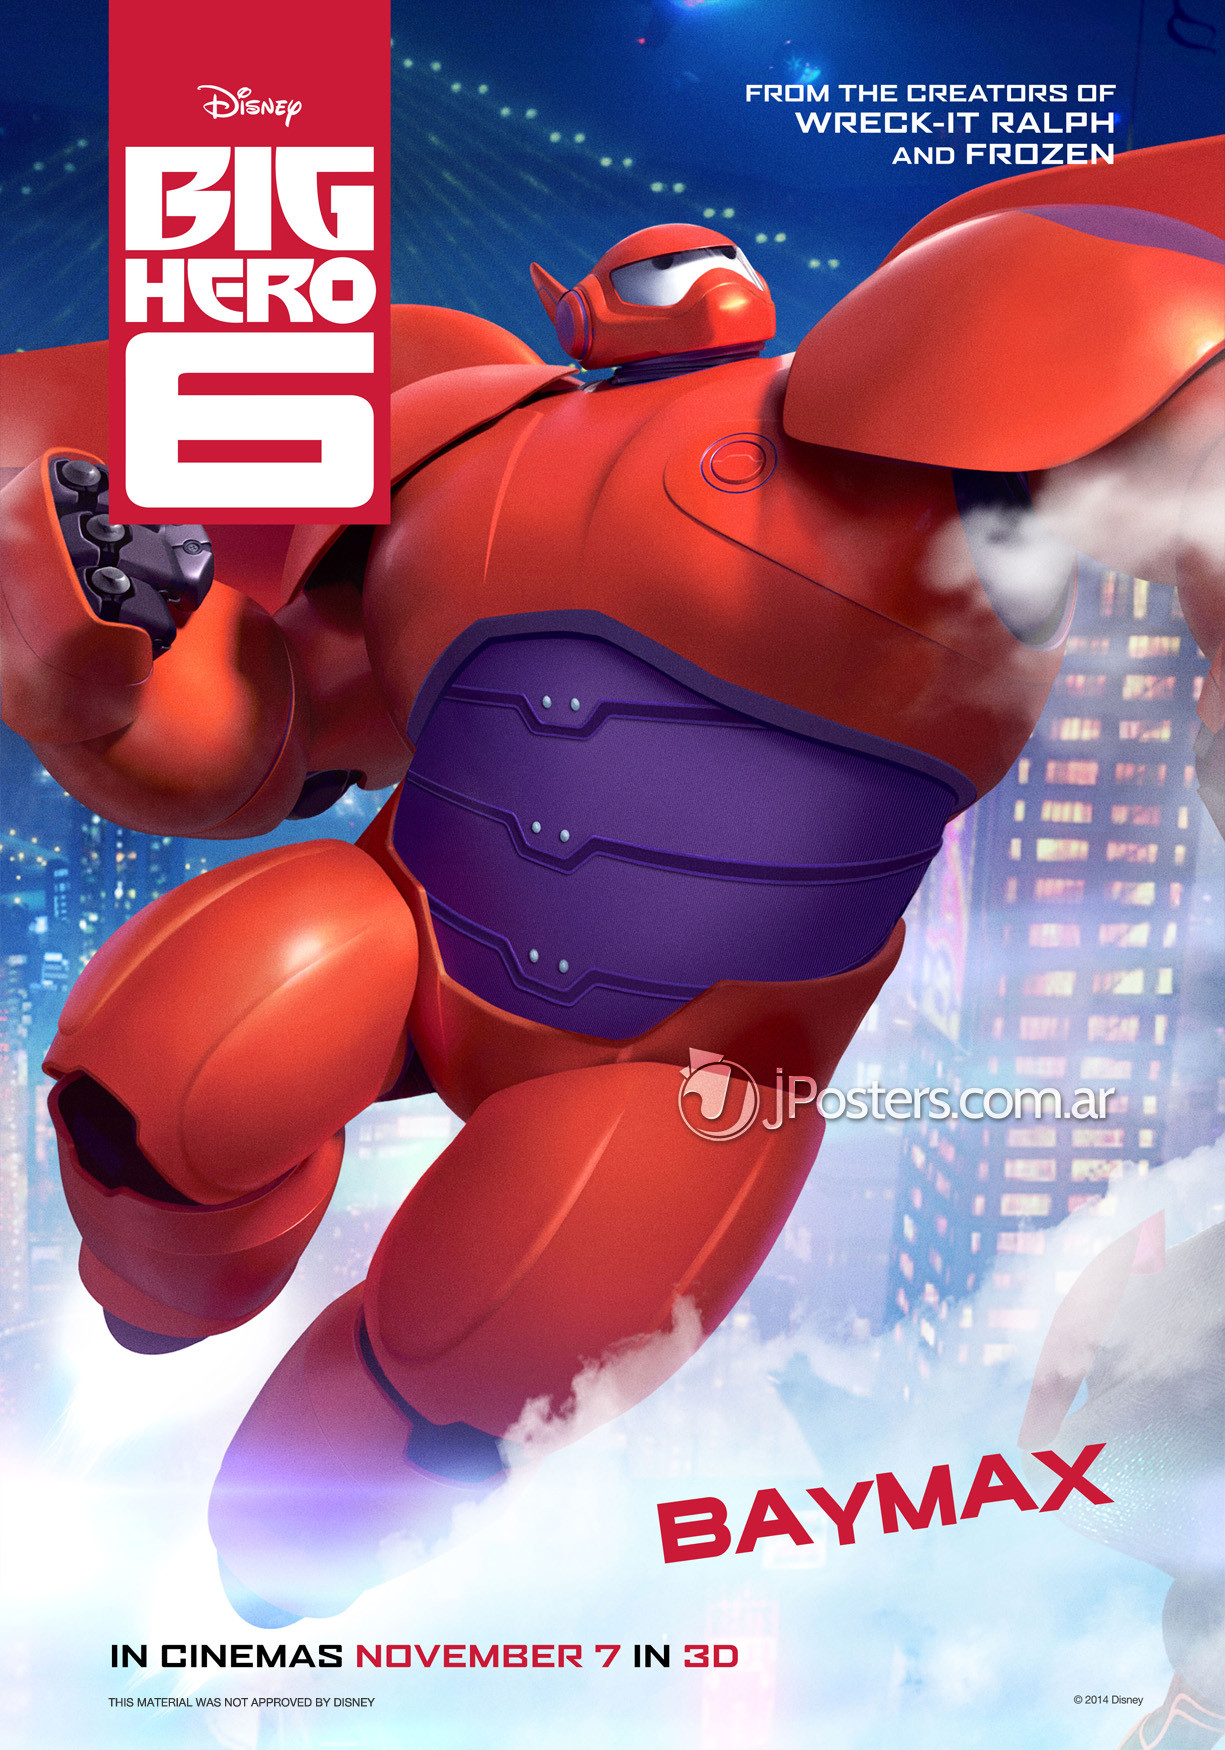 6 New Character Posters For Marvel And Disneys Big Hero 6 We